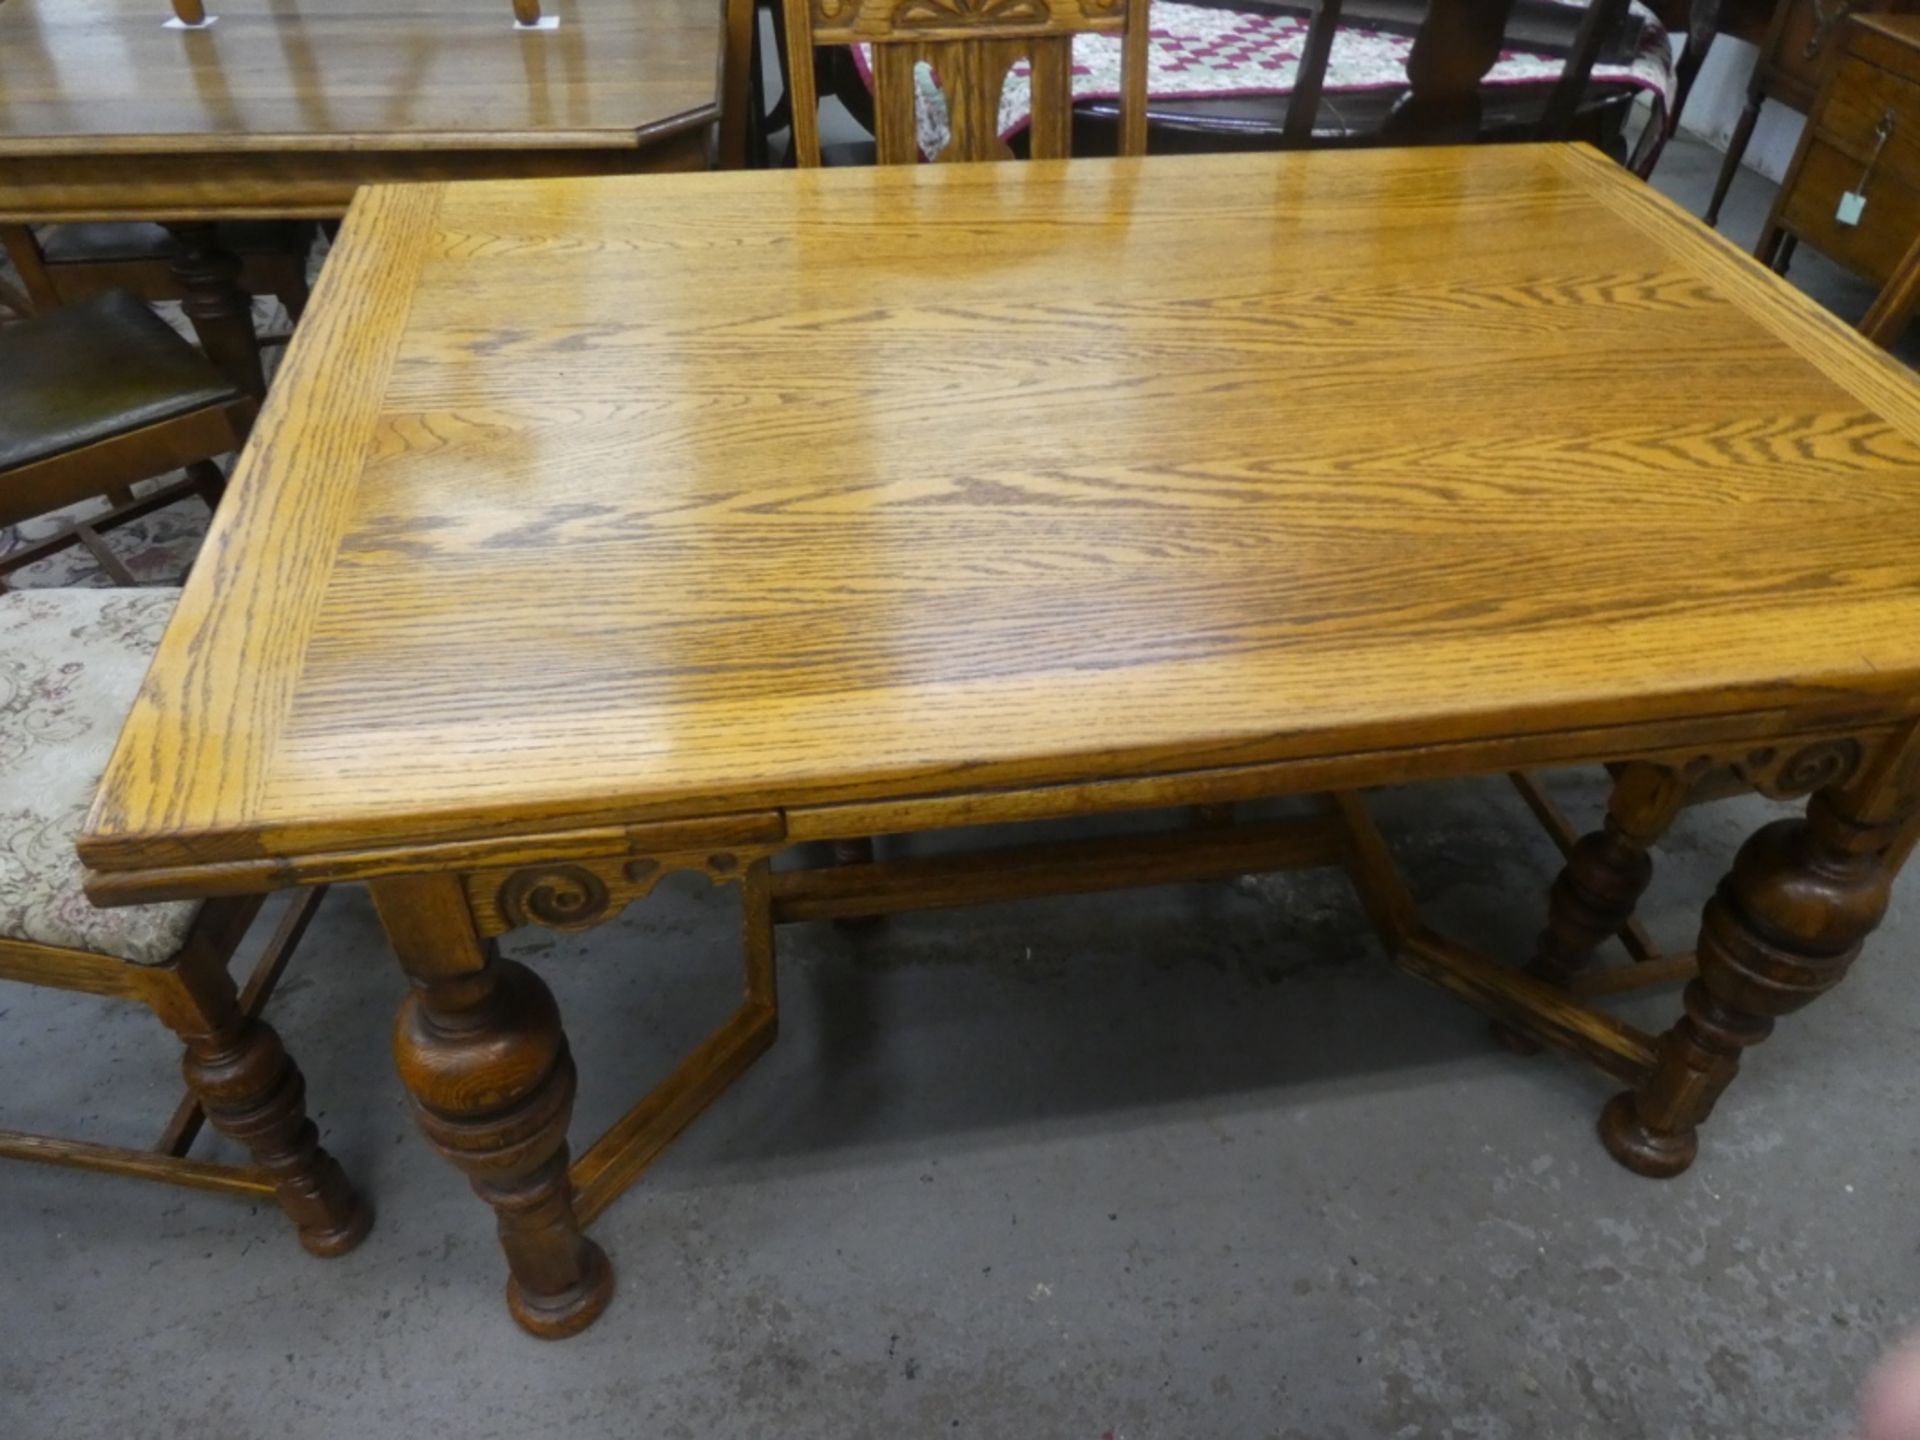 OAK TABLE & 6 CHAIRS 30"H 56"W 38"D EXTENDS TO 86"W - Image 3 of 4